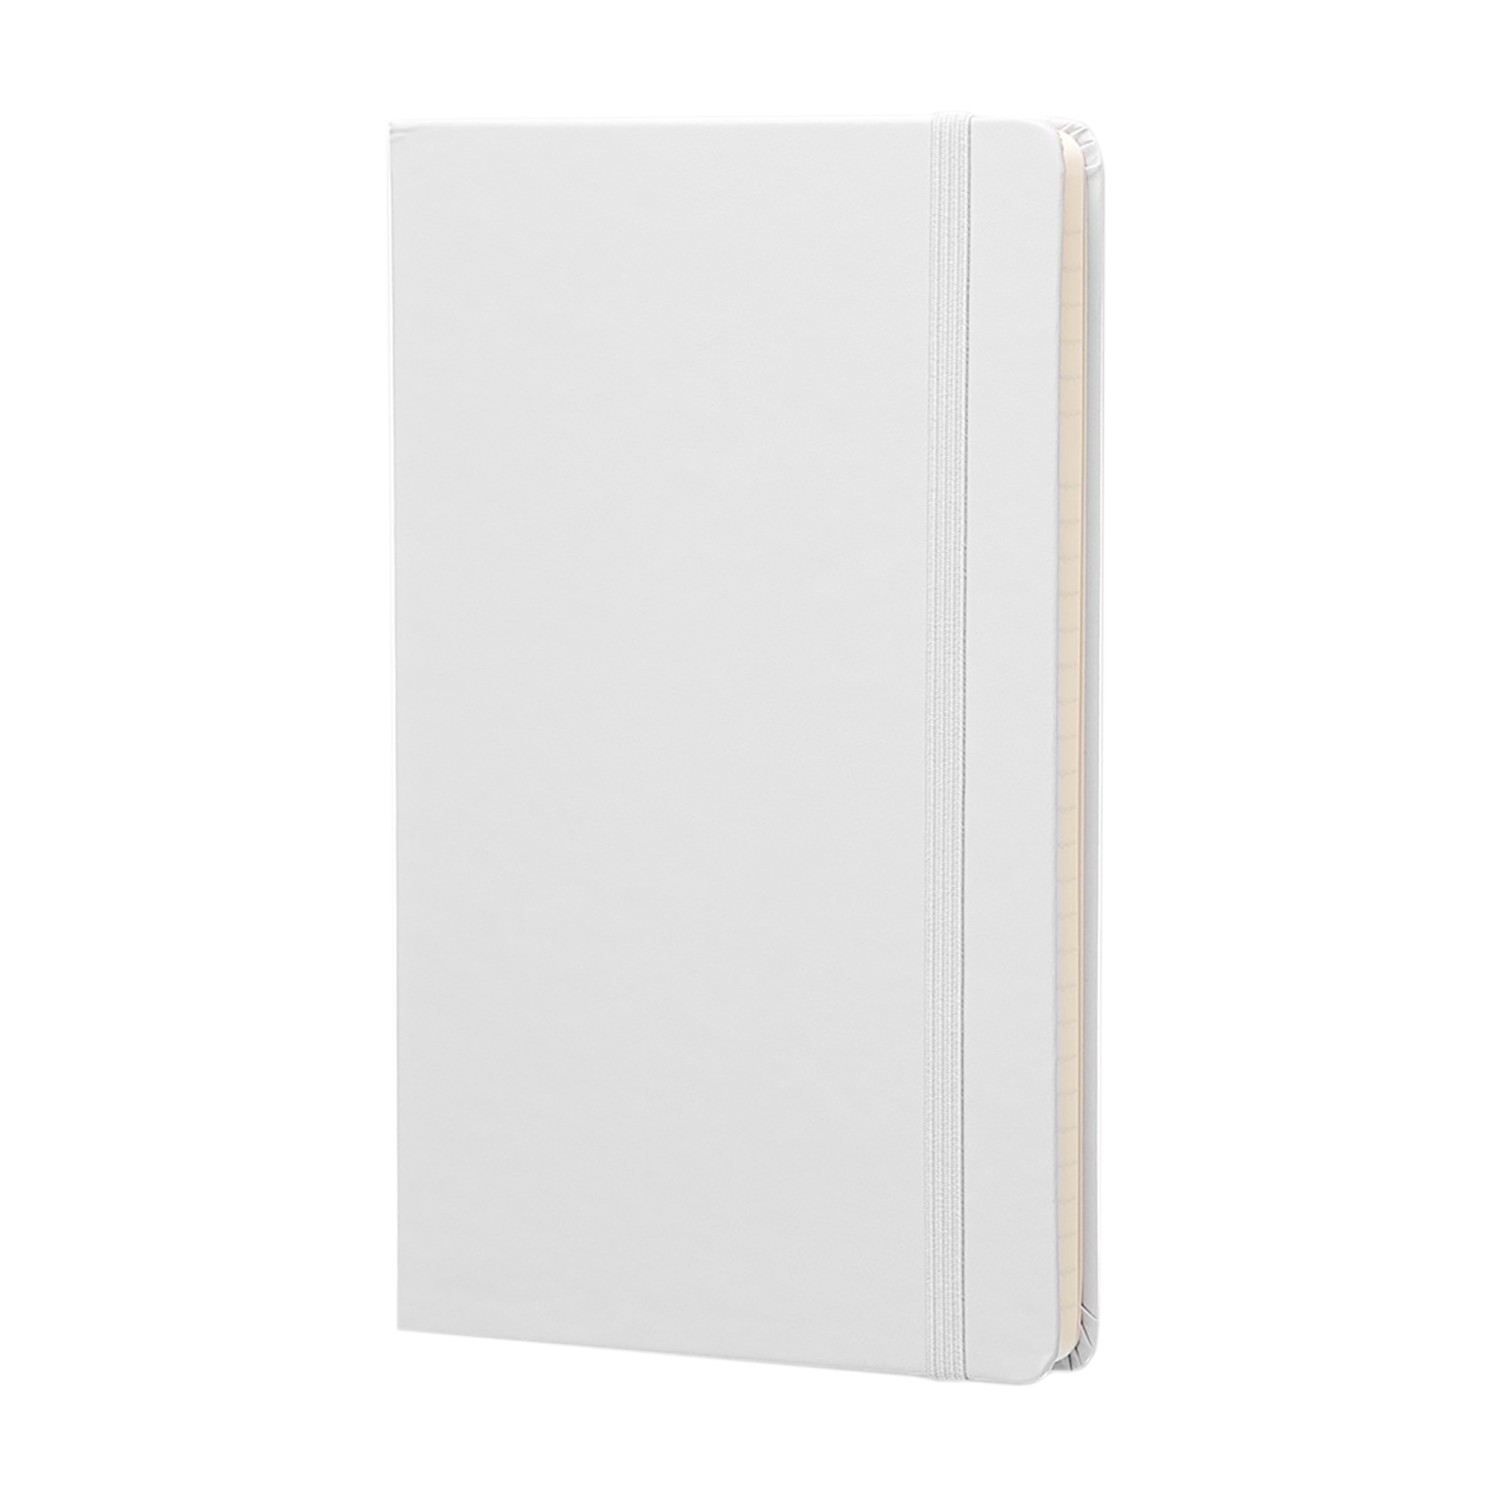 Classic Notebook Hard Cover Large